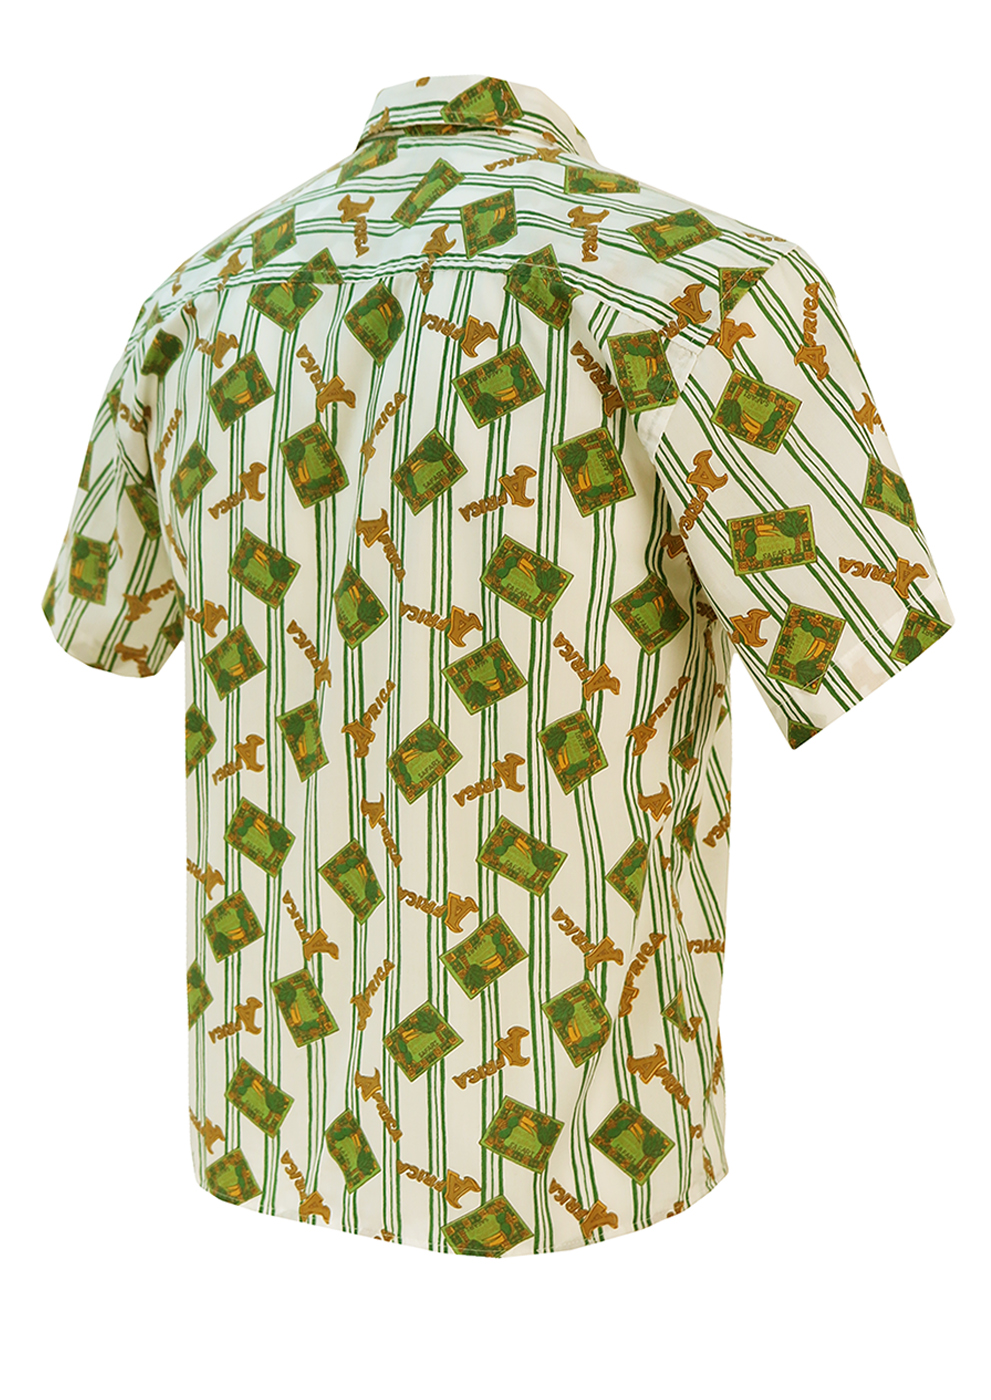 Short Sleeved Green & White Striped Shirt with African Safari Theme - S ...